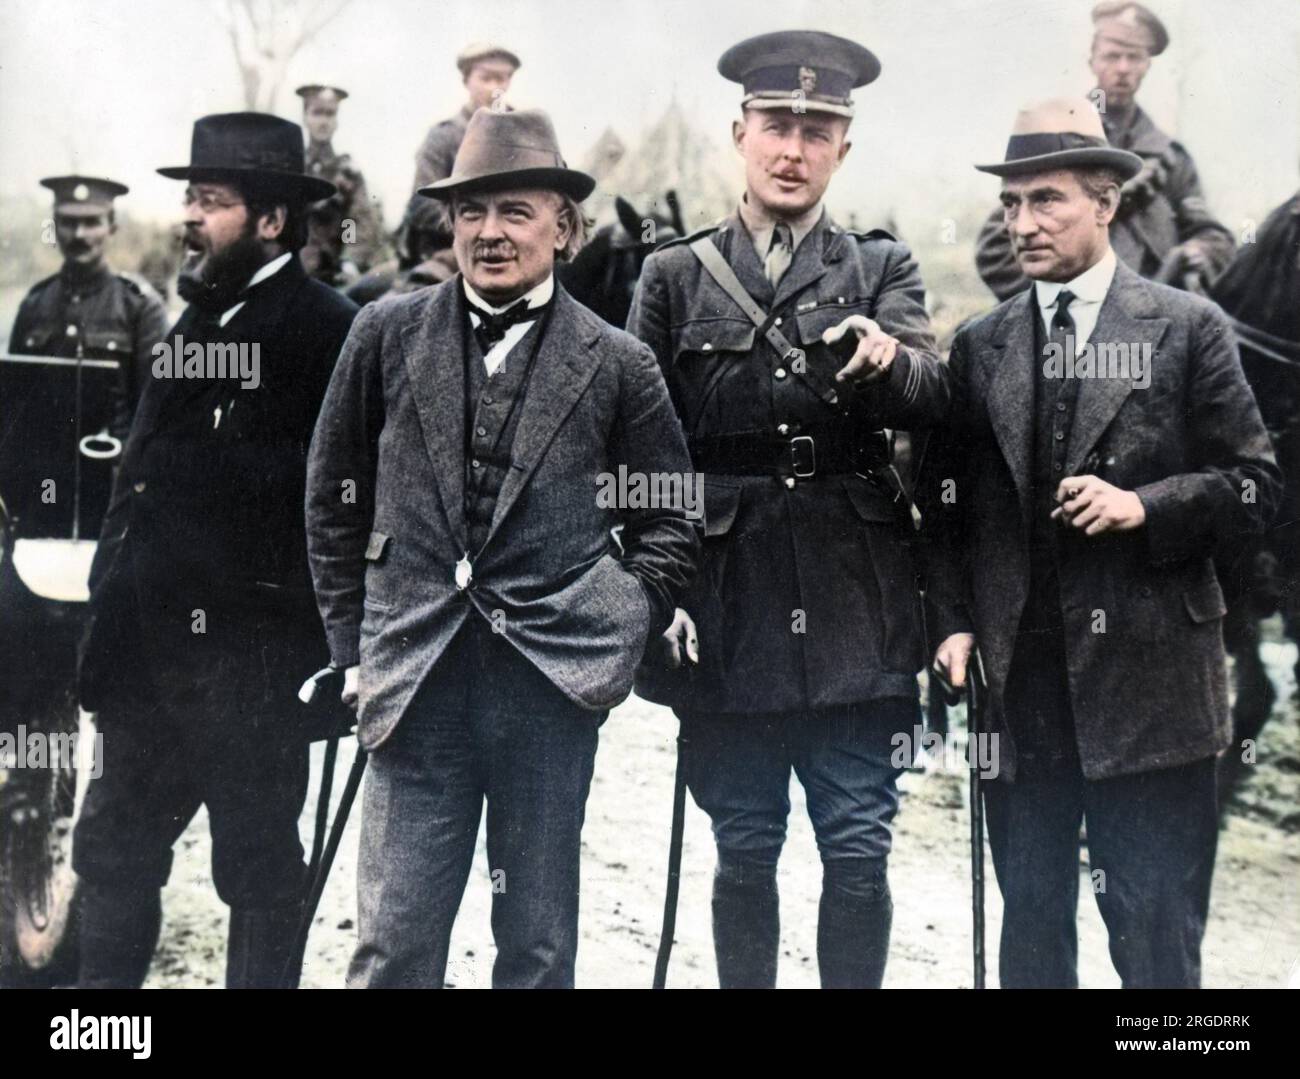 David Lloyd George (1863-1945), British Prime Minister, with others during the First World War.  The bearded man on the far left is Albert Thomas, French Minister for Munitions. Stock Photo